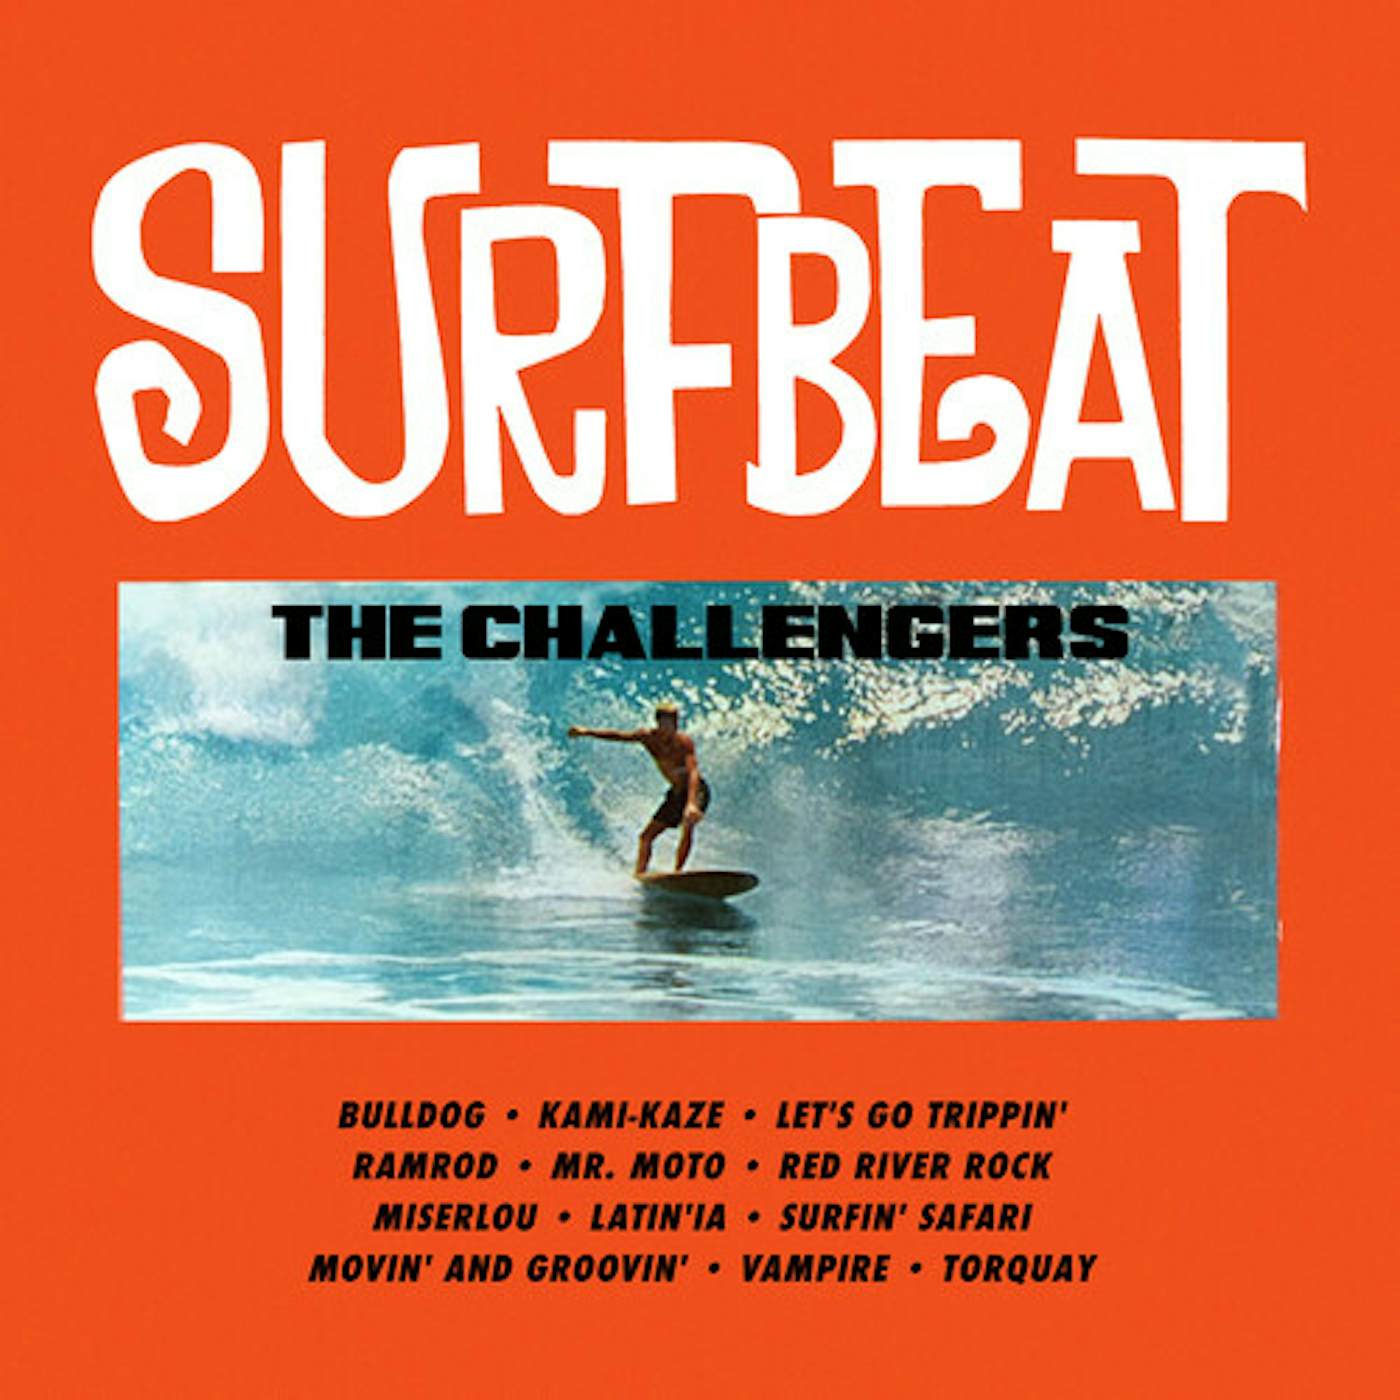 The Challengers SURFBEAT CD